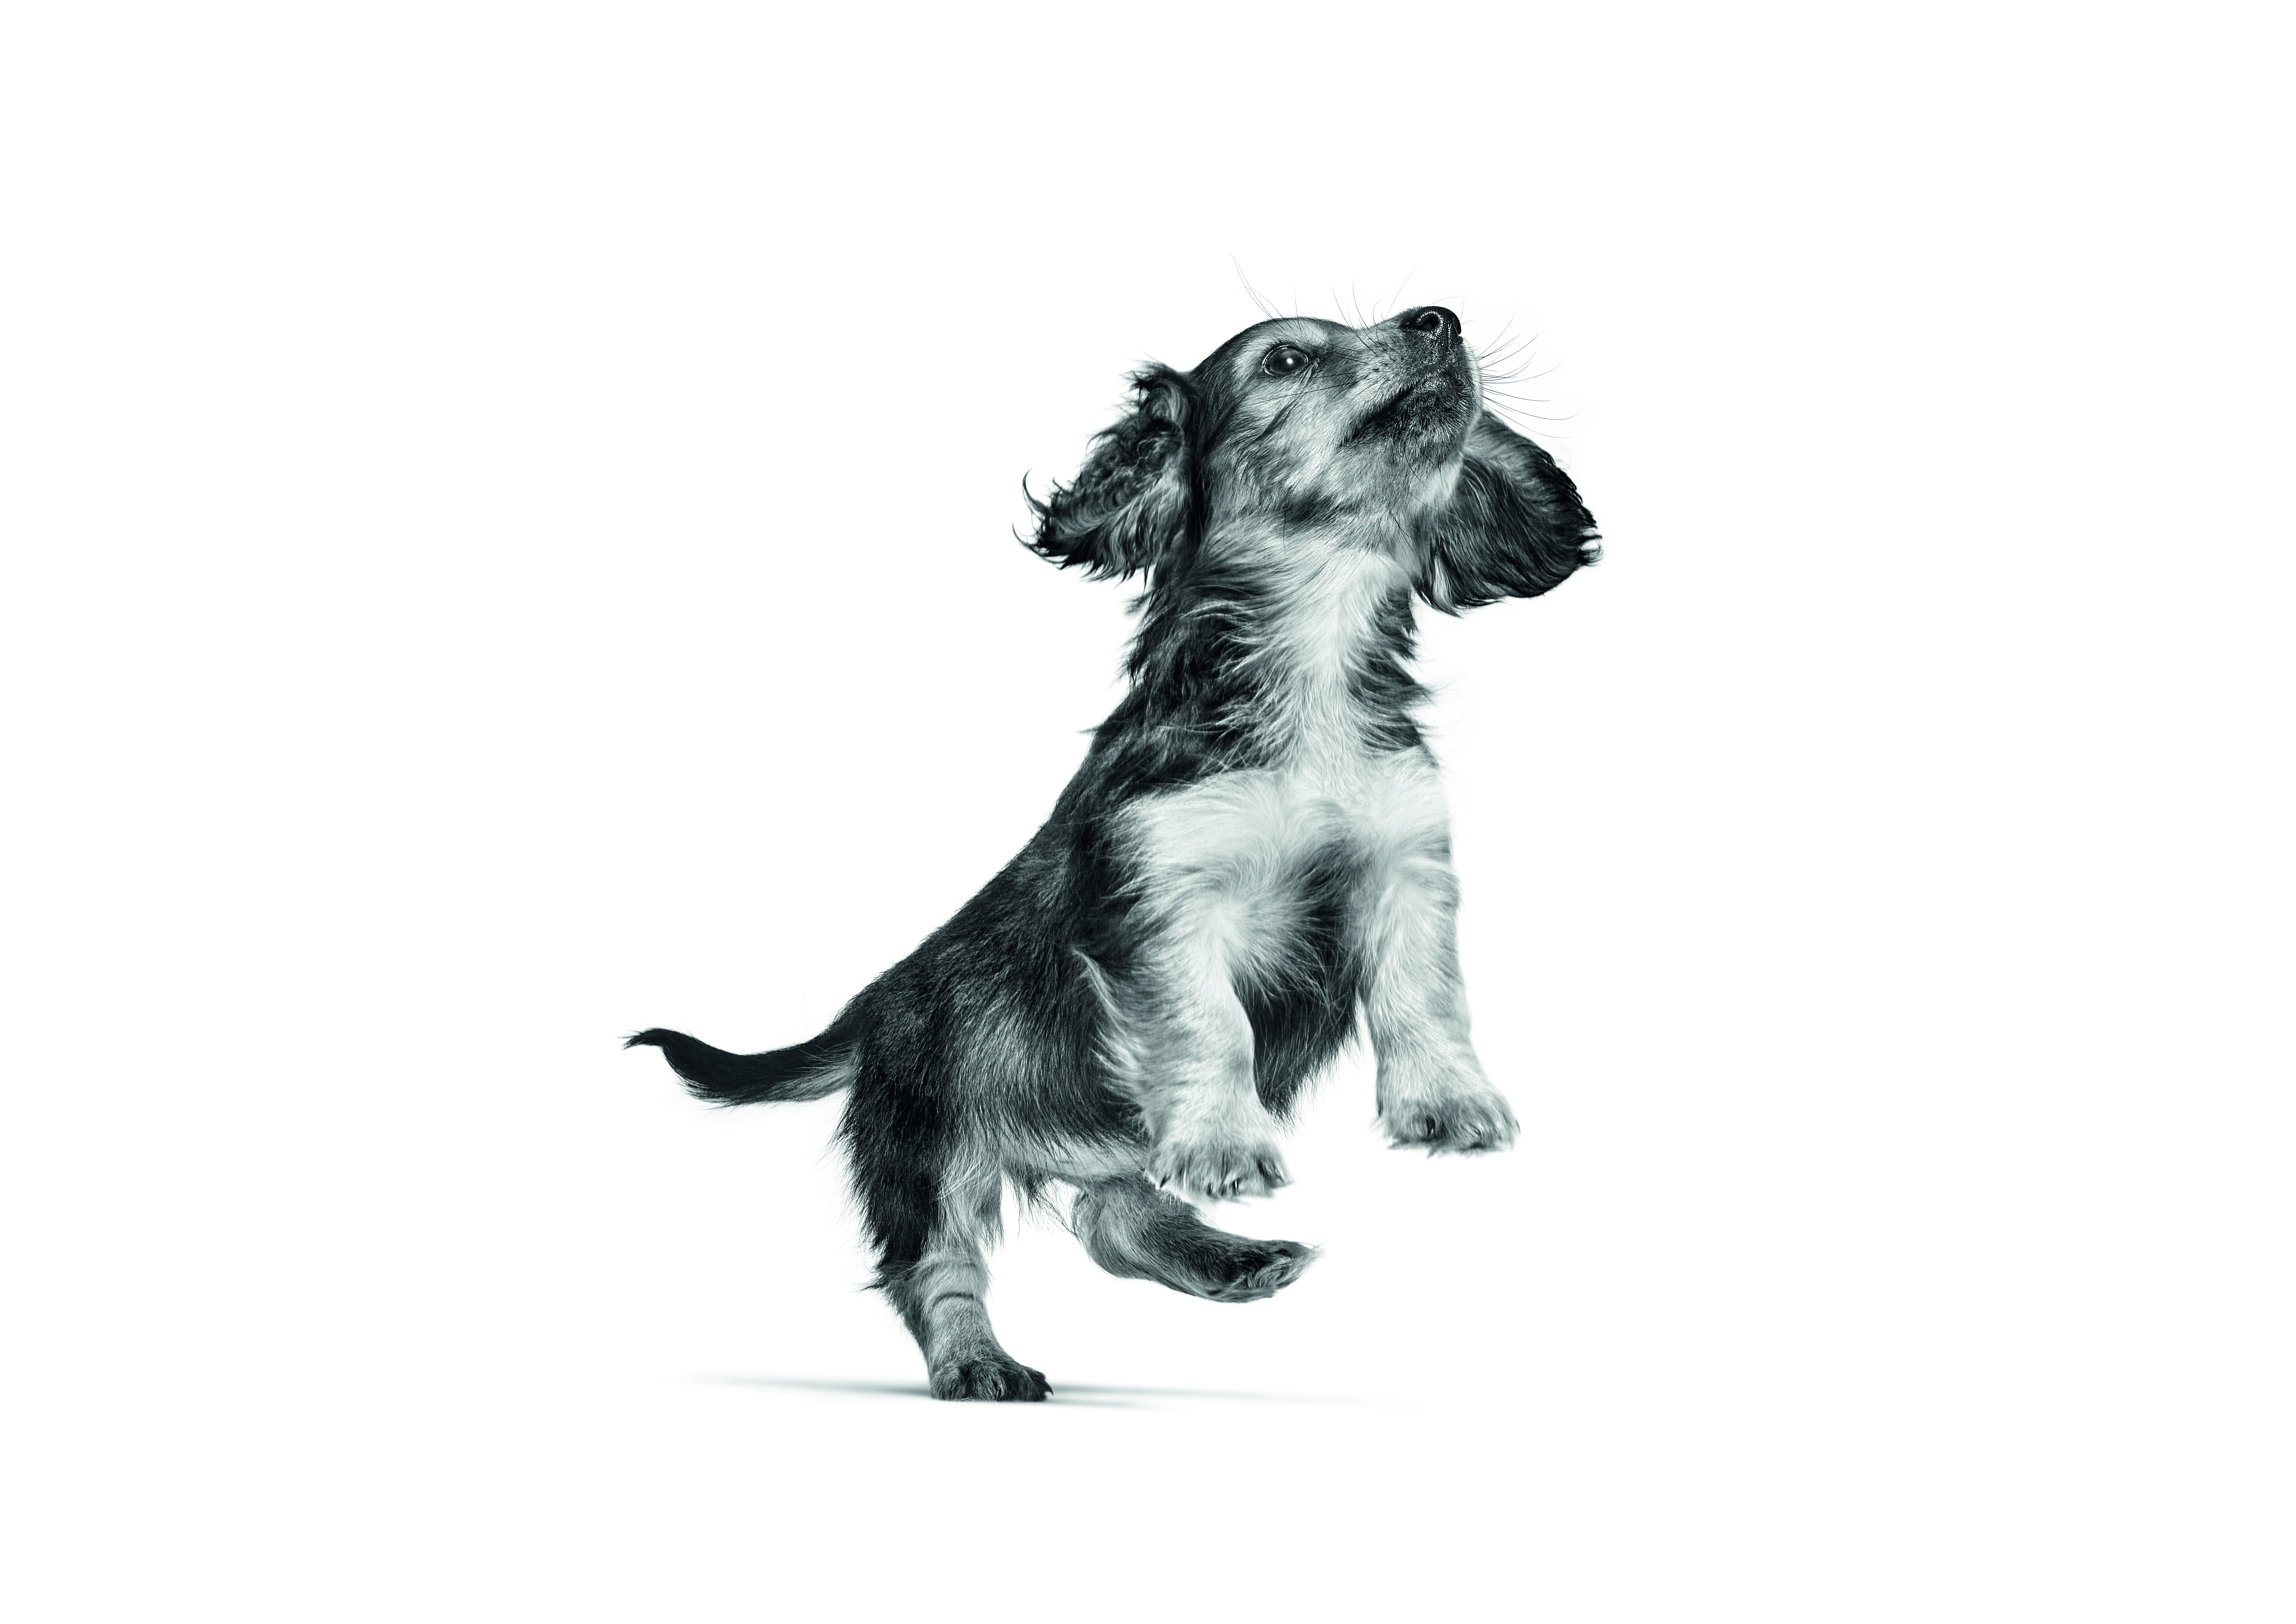 Dachshund puppy jumping in black and white on a white background